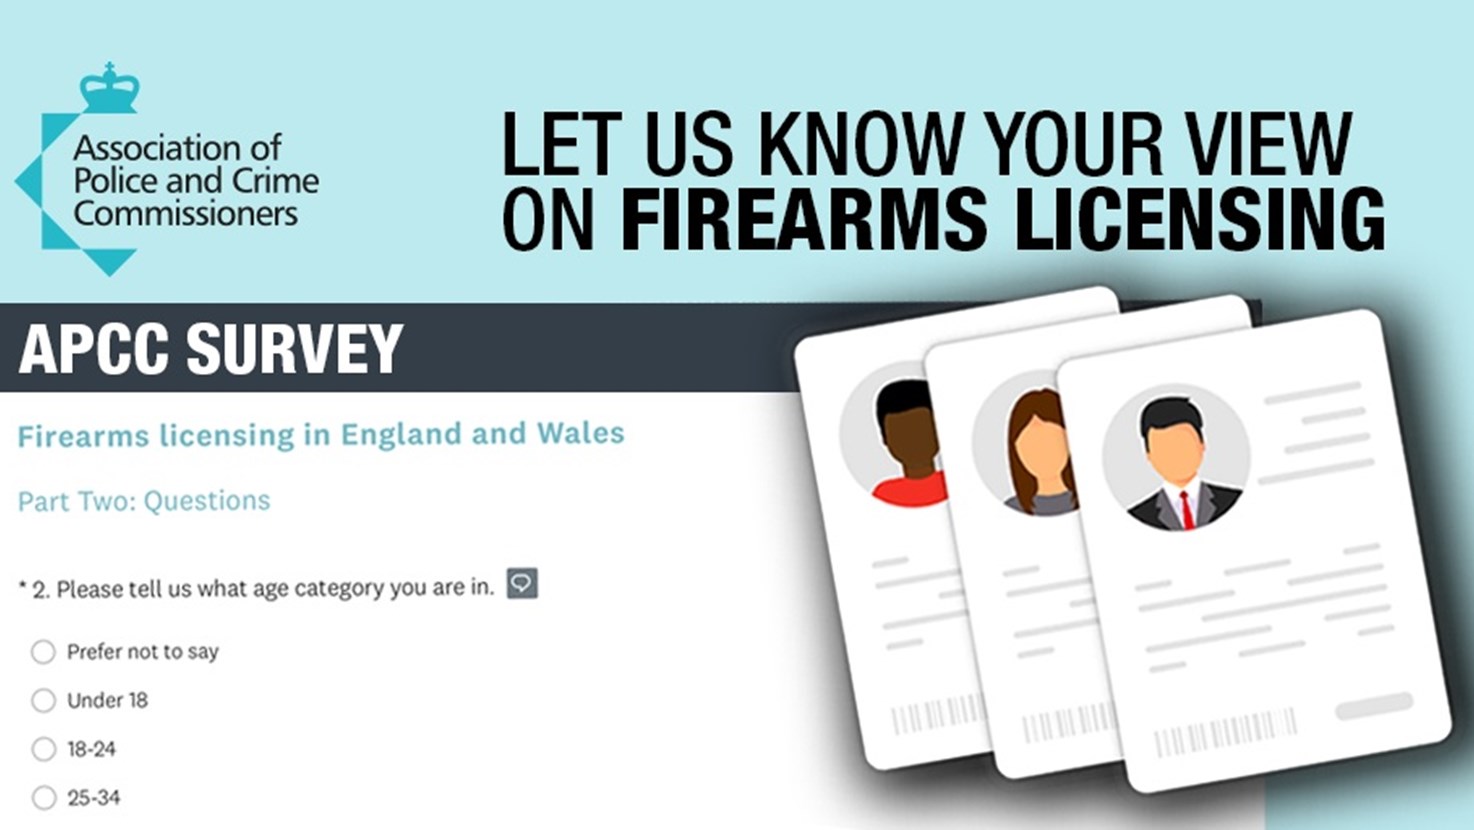 Have your say on potential changes to firearms licensing